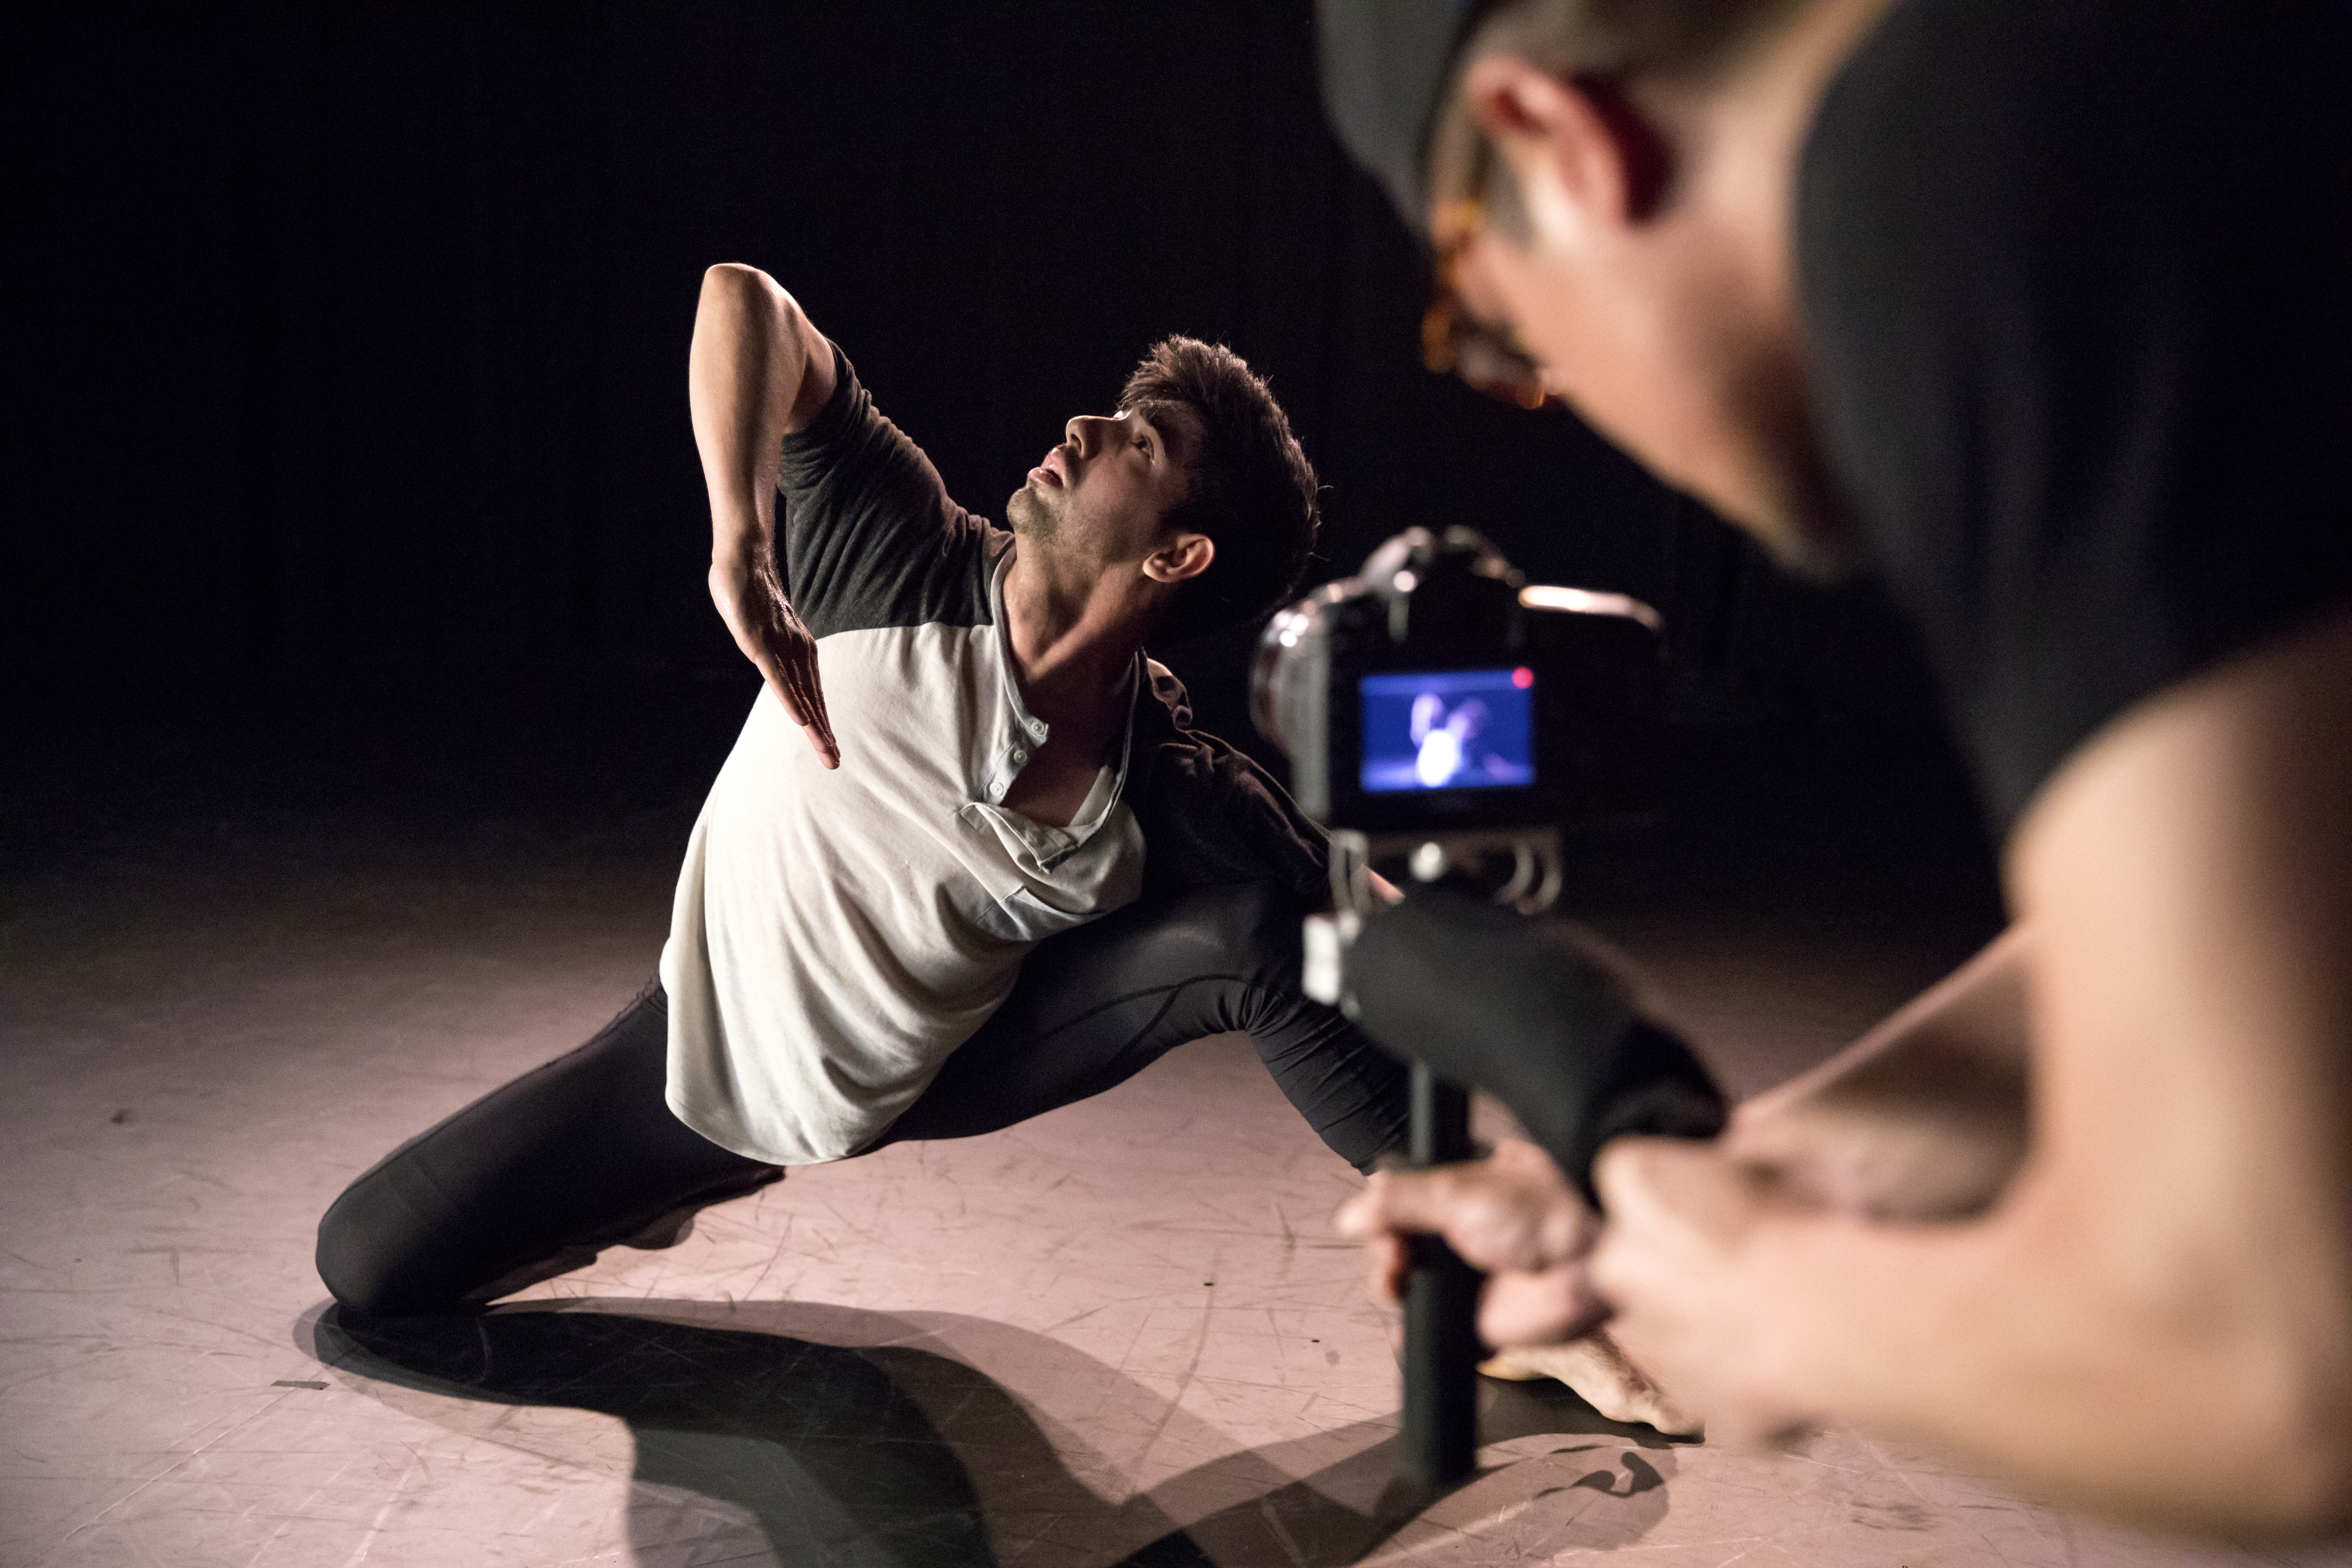 A behind-the-scenes image of a male dancer performing for a video camera.